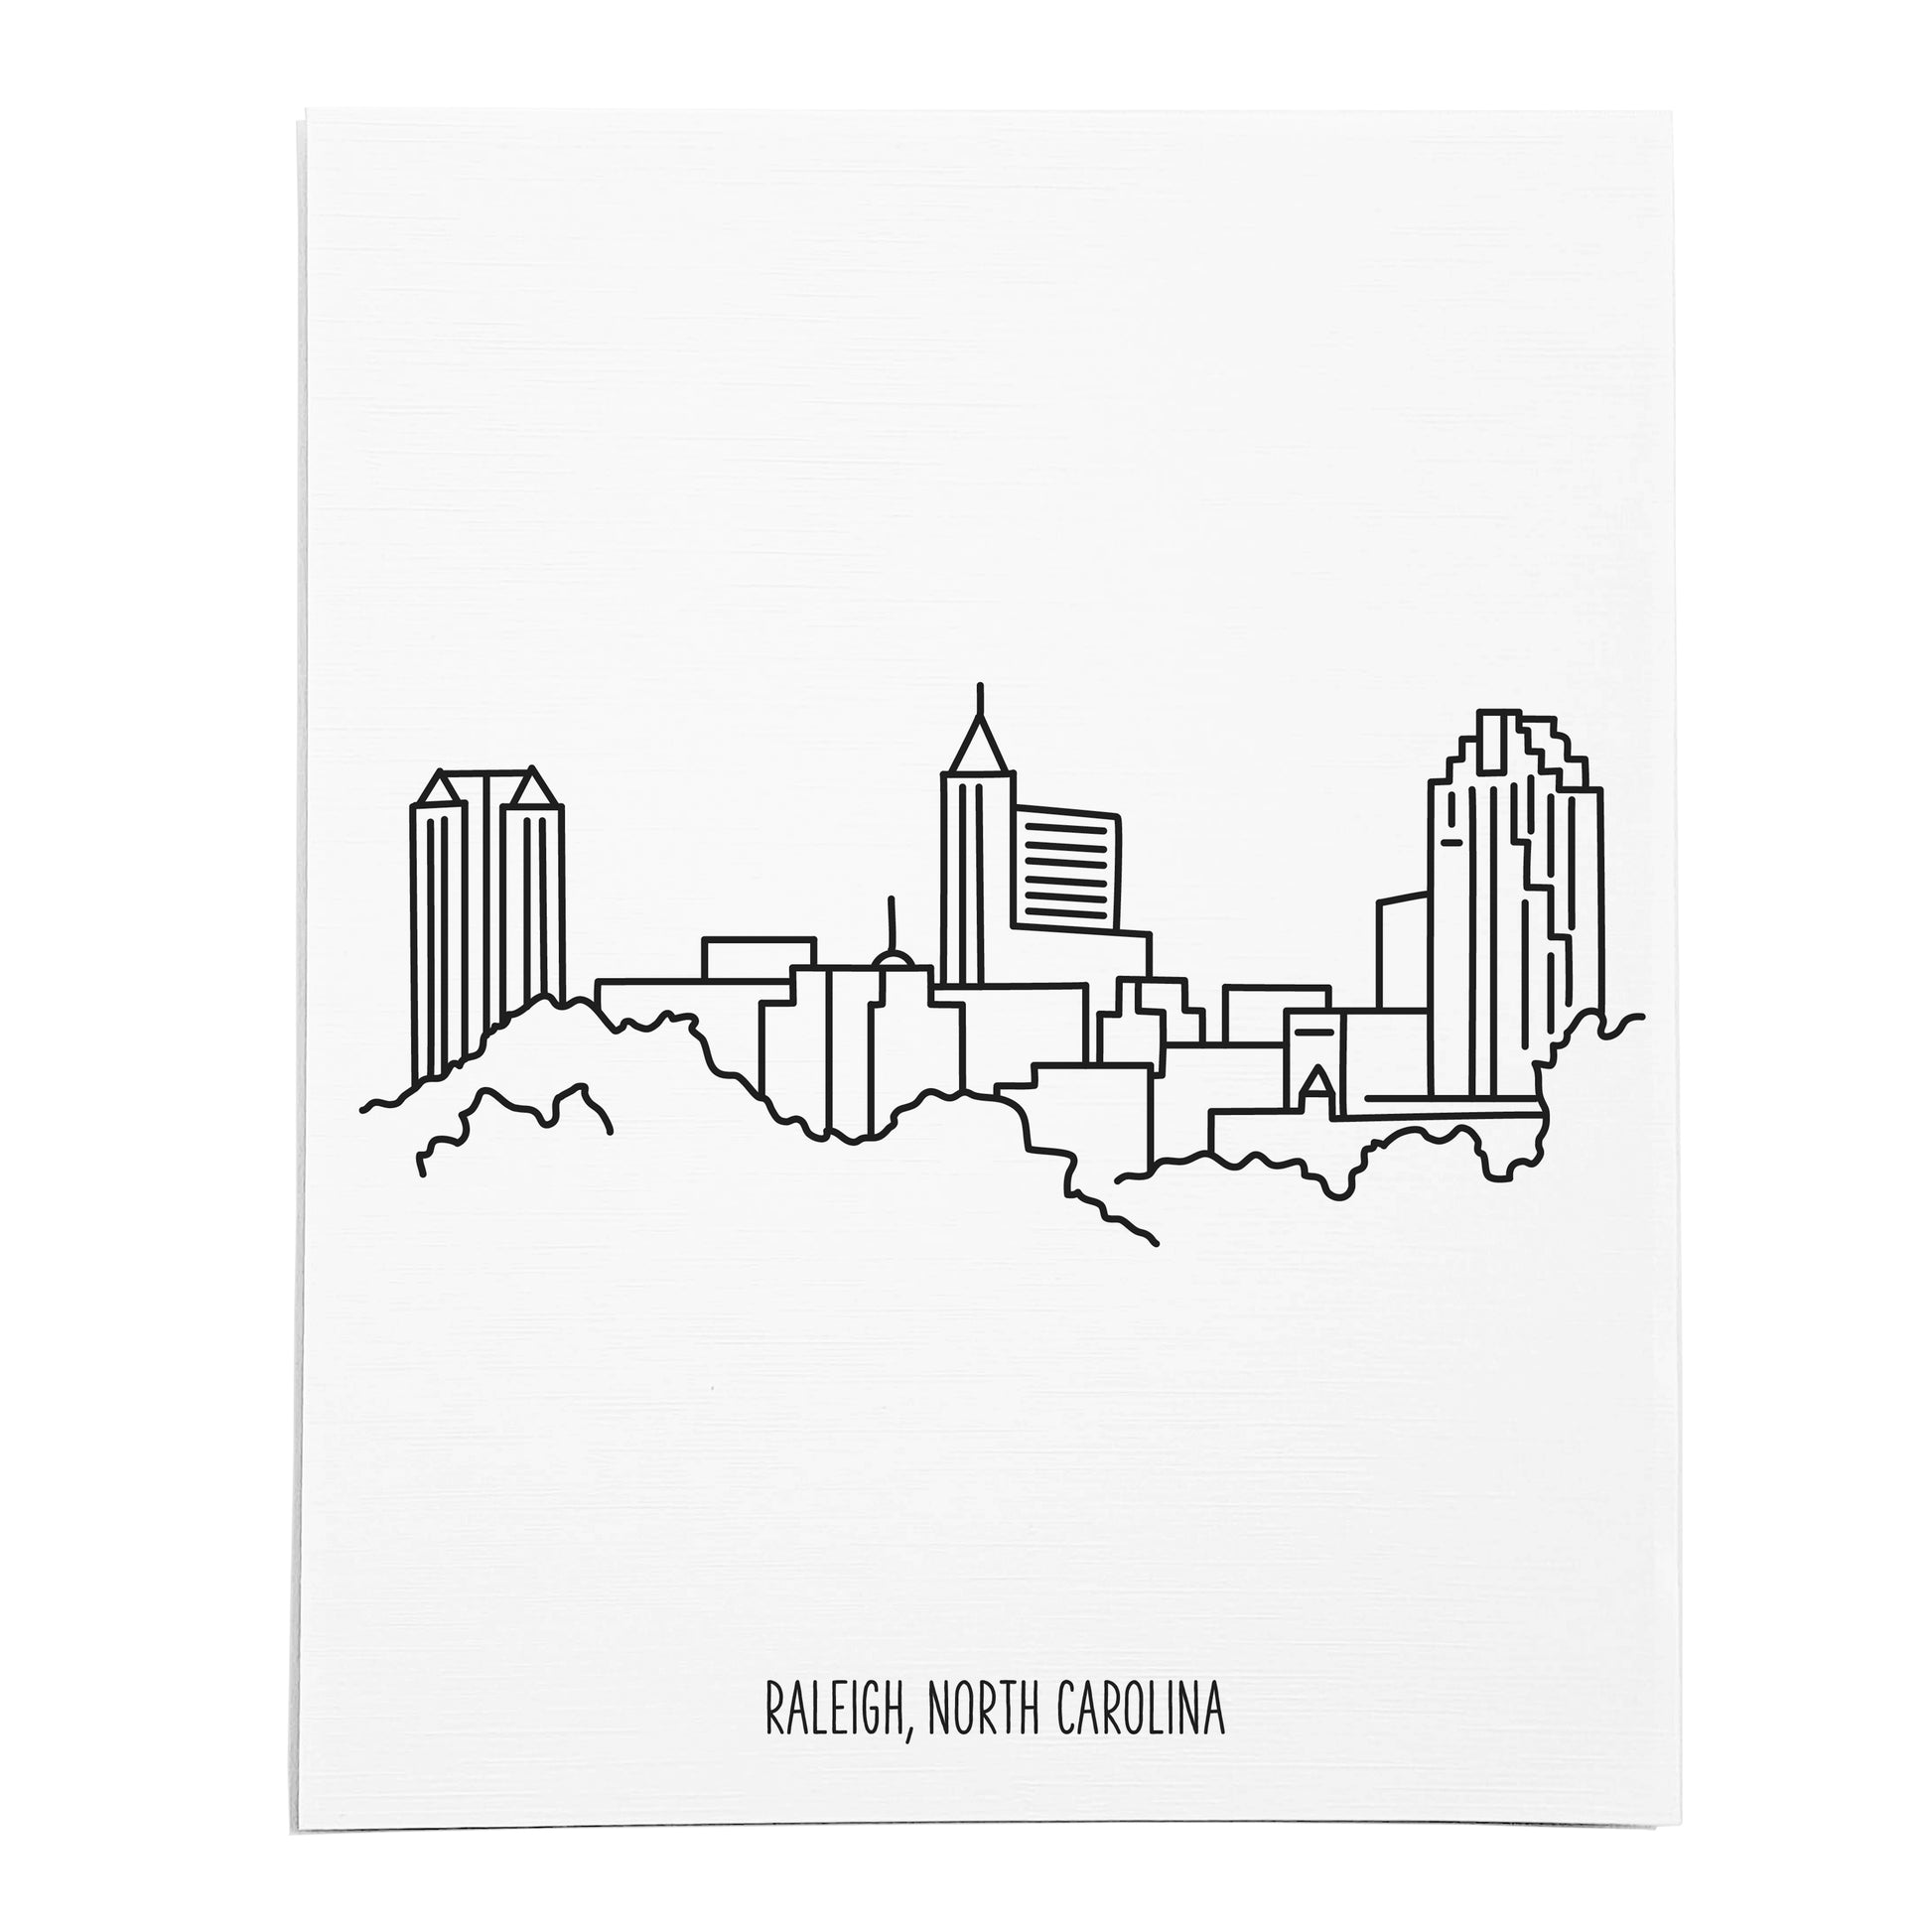 An art print featuring a line drawing of the Raleigh Skyline on white linen paper